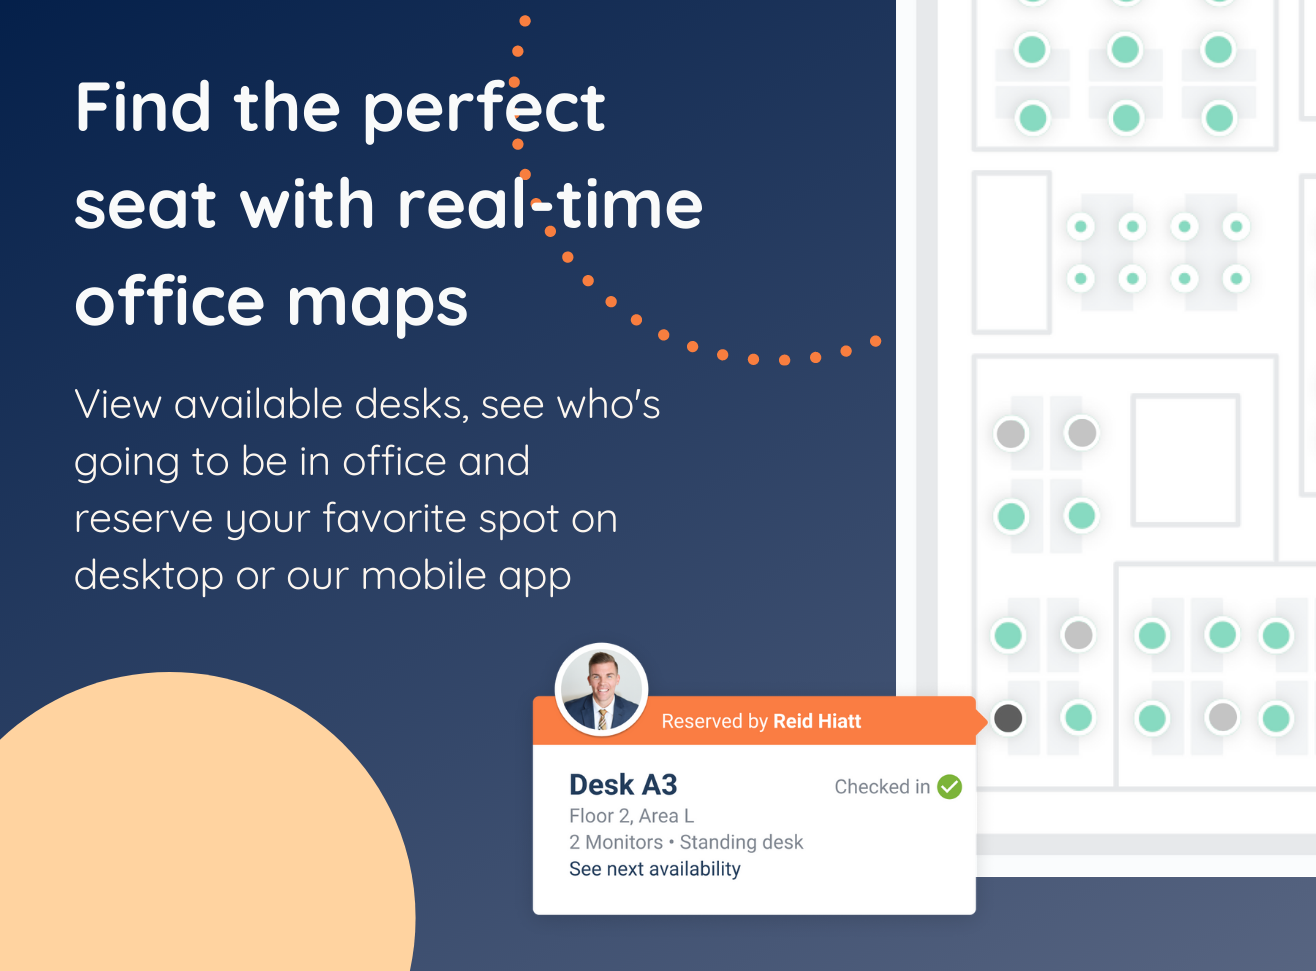 Find the perfect seat with real-time office maps